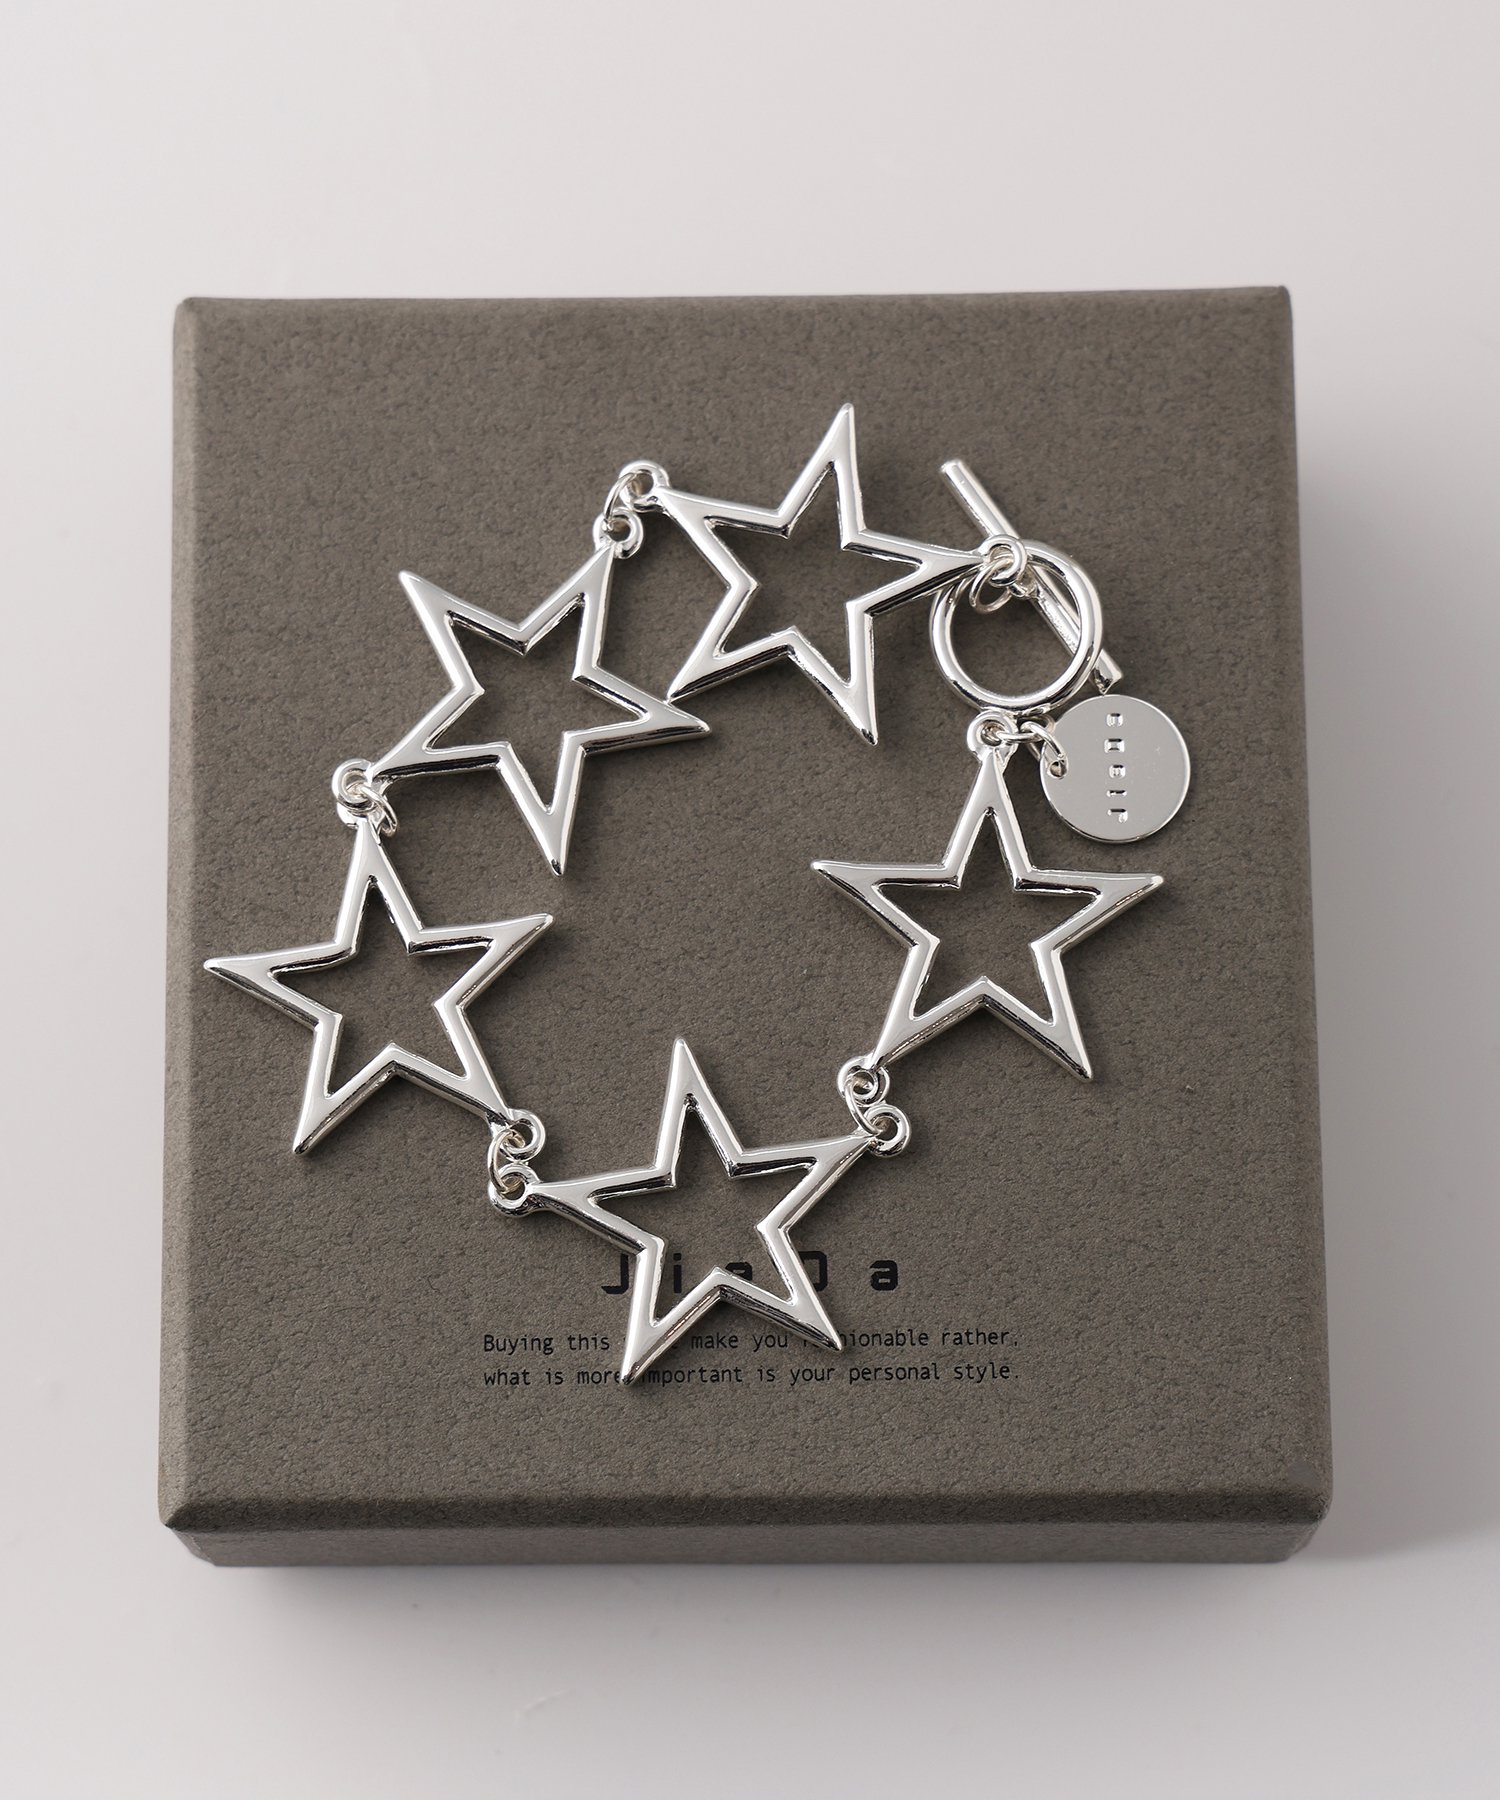 JieDa<br />BIG OPEN STAR BRACELET / SILVER<img class='new_mark_img2' src='https://img.shop-pro.jp/img/new/icons14.gif' style='border:none;display:inline;margin:0px;padding:0px;width:auto;' />